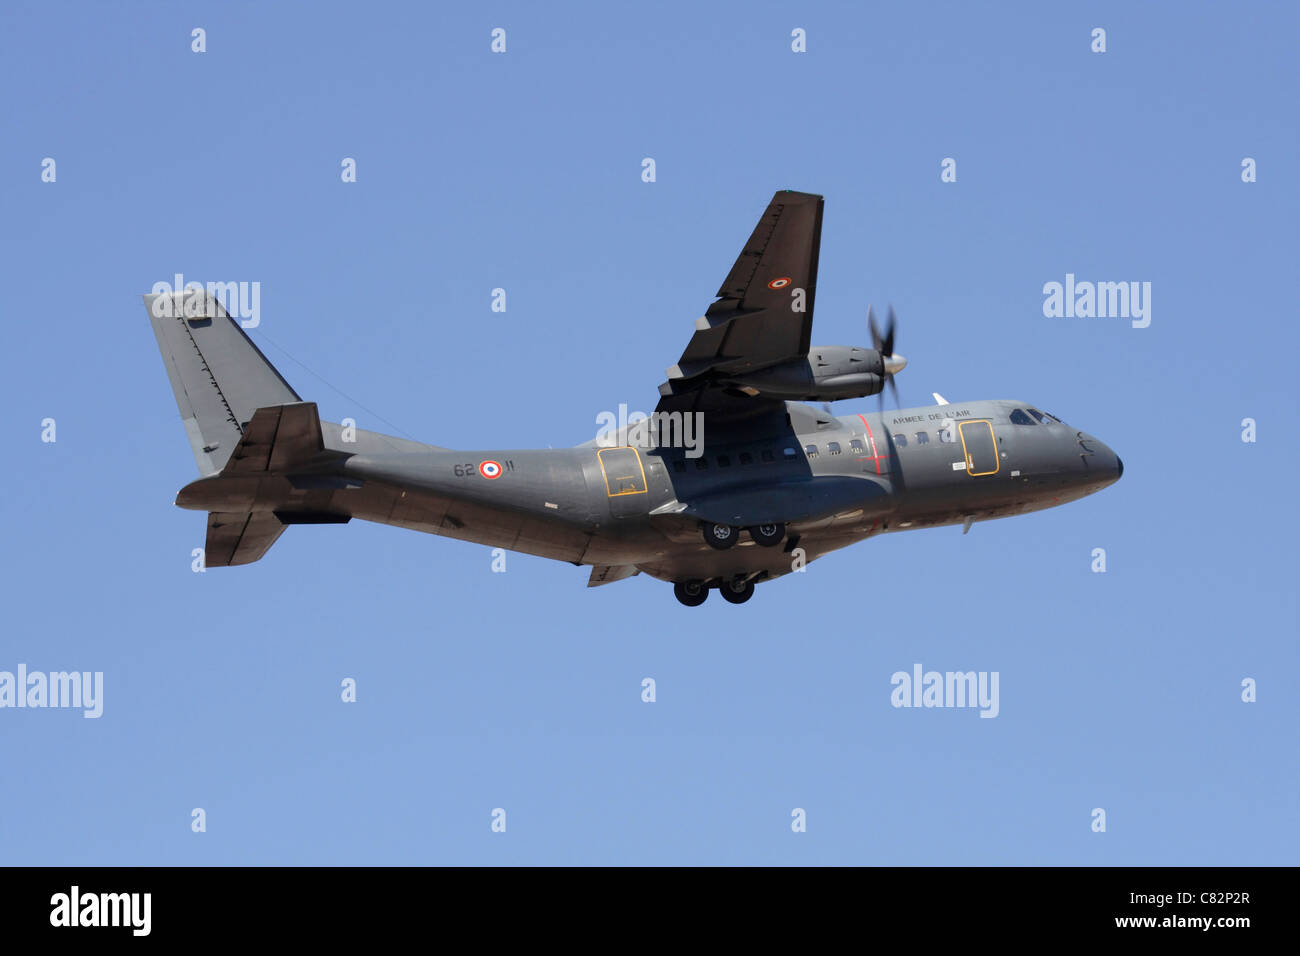 French Air Force CASA CN-235 light military transport plane on takeoff against a clear blue sky Stock Photo